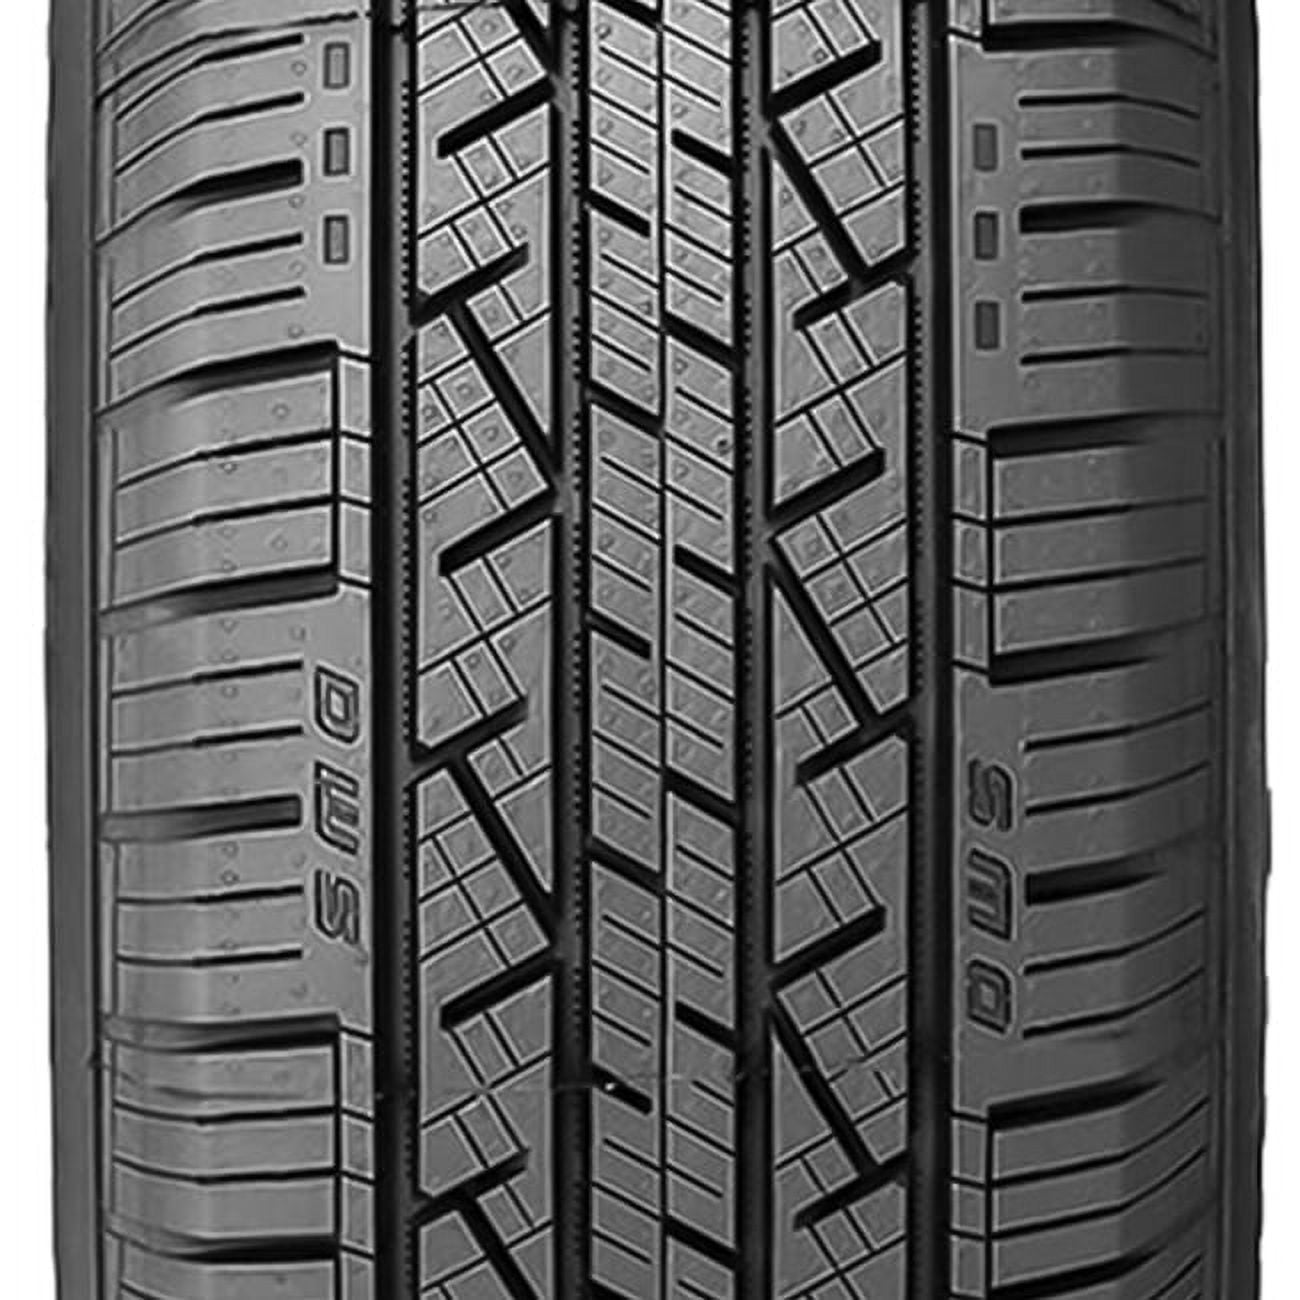 Continental CrossContact LX25 All Season 235/60R17 102H SUV/Crossover Tire